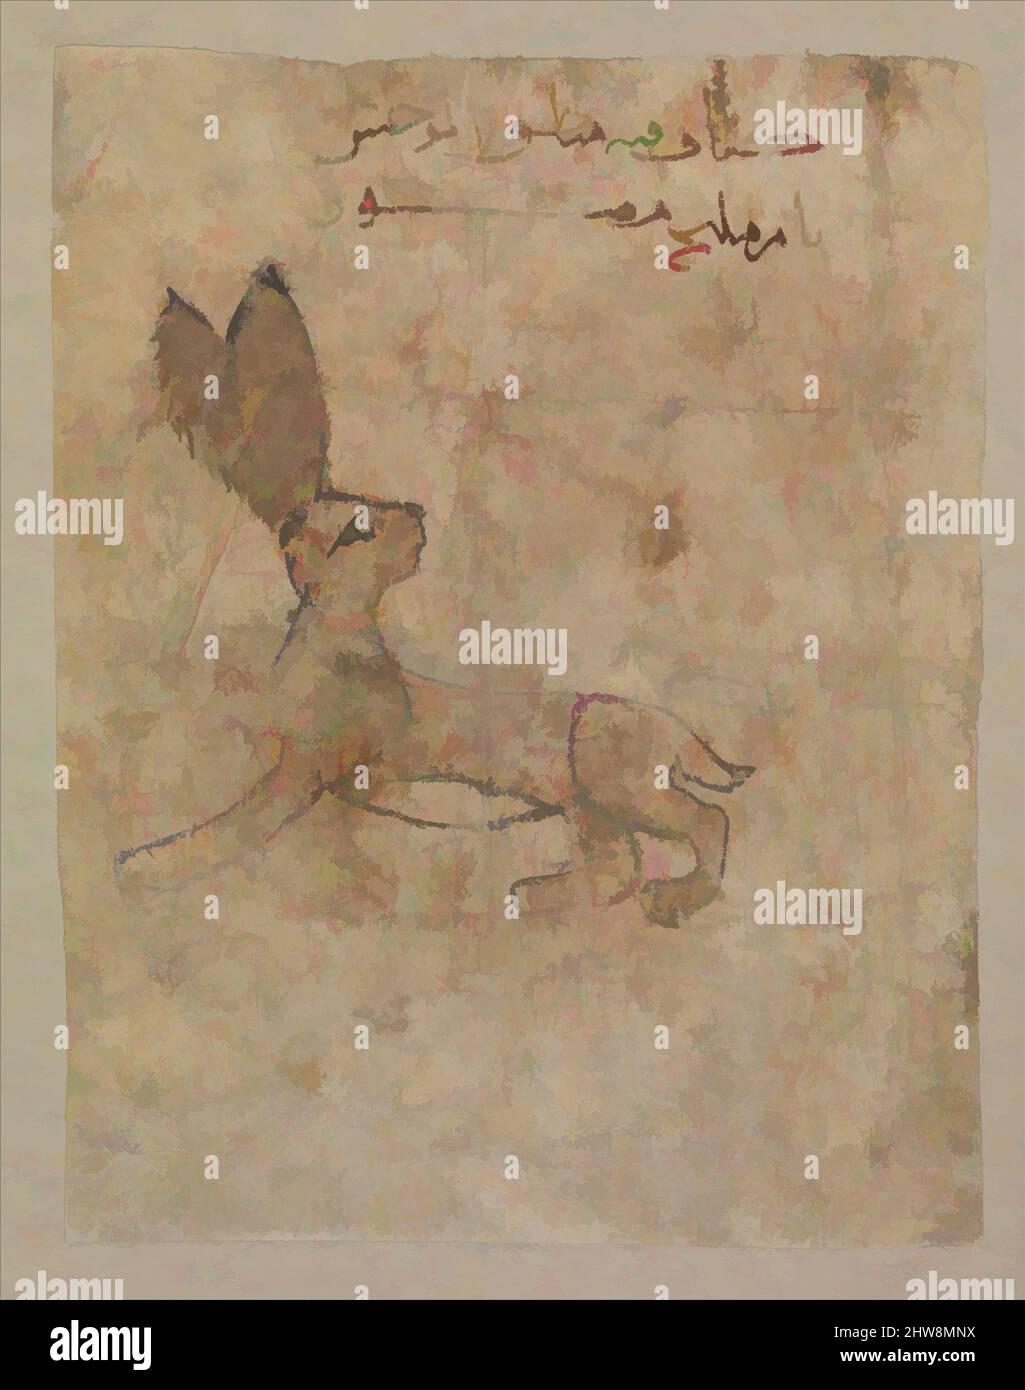 Art inspired by Hare', Folio from the Mantiq al-wahsh (Speech of the Wild Animal) of Ka'b al-Ahbar, 11th–12th century, Found Egypt, probably Fustat, Opaque watercolor on paper, H. 6-3/16 ' (15.72 cm)., Codices, This page from a zoological manuscript contains lines of text and two, Classic works modernized by Artotop with a splash of modernity. Shapes, color and value, eye-catching visual impact on art. Emotions through freedom of artworks in a contemporary way. A timeless message pursuing a wildly creative new direction. Artists turning to the digital medium and creating the Artotop NFT Stock Photo